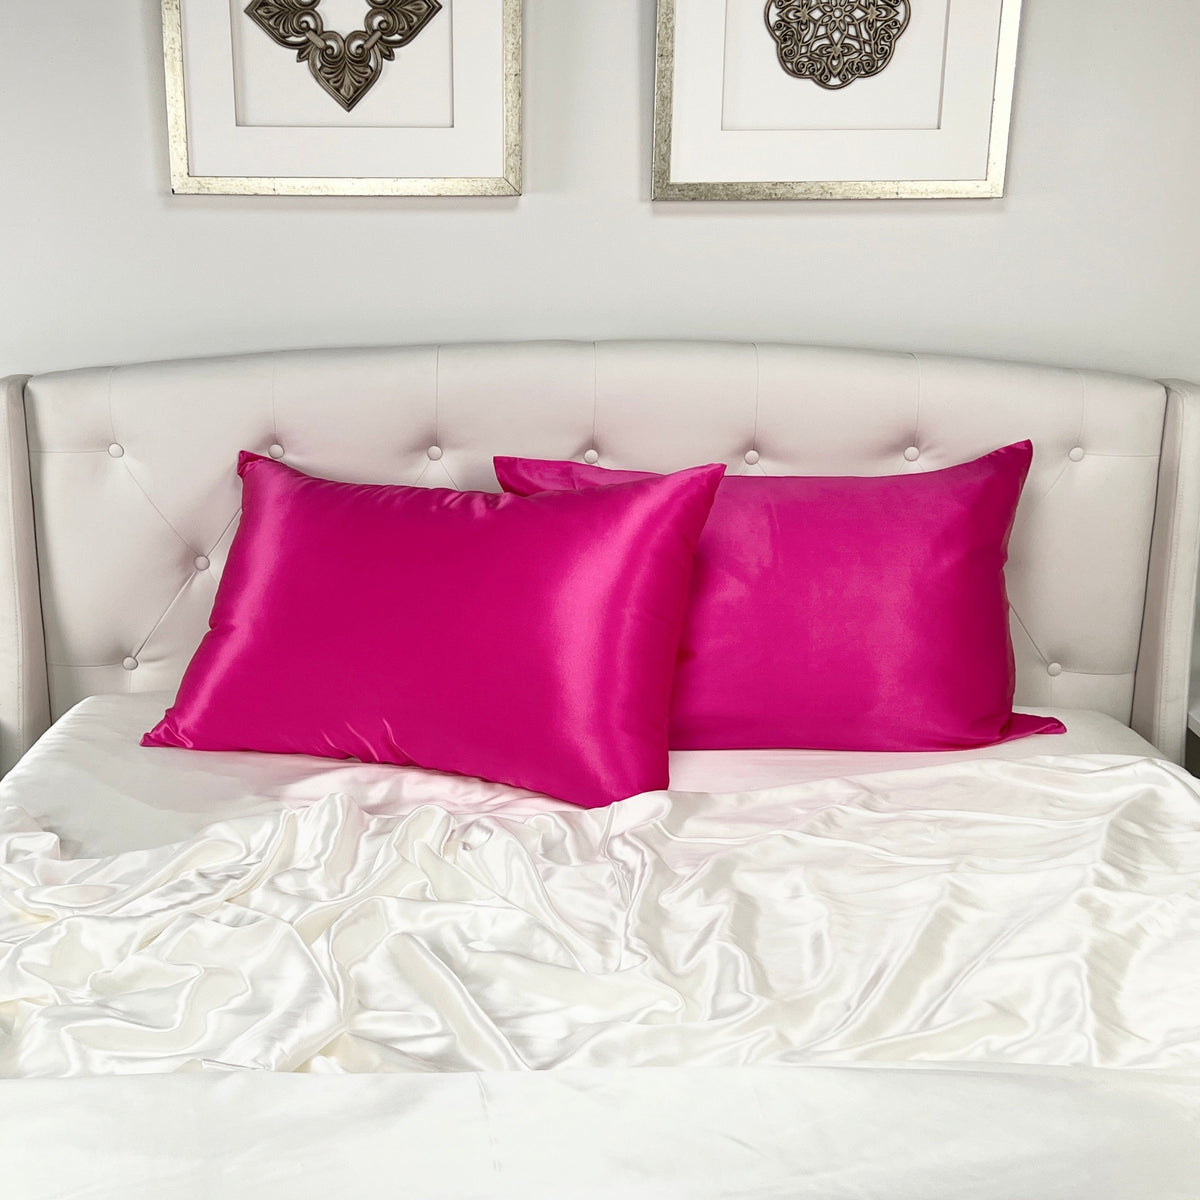 Pair of Mulberry Park Silks Deluxe 19 Momme Pure Silk Pillowcase in Magenta Color